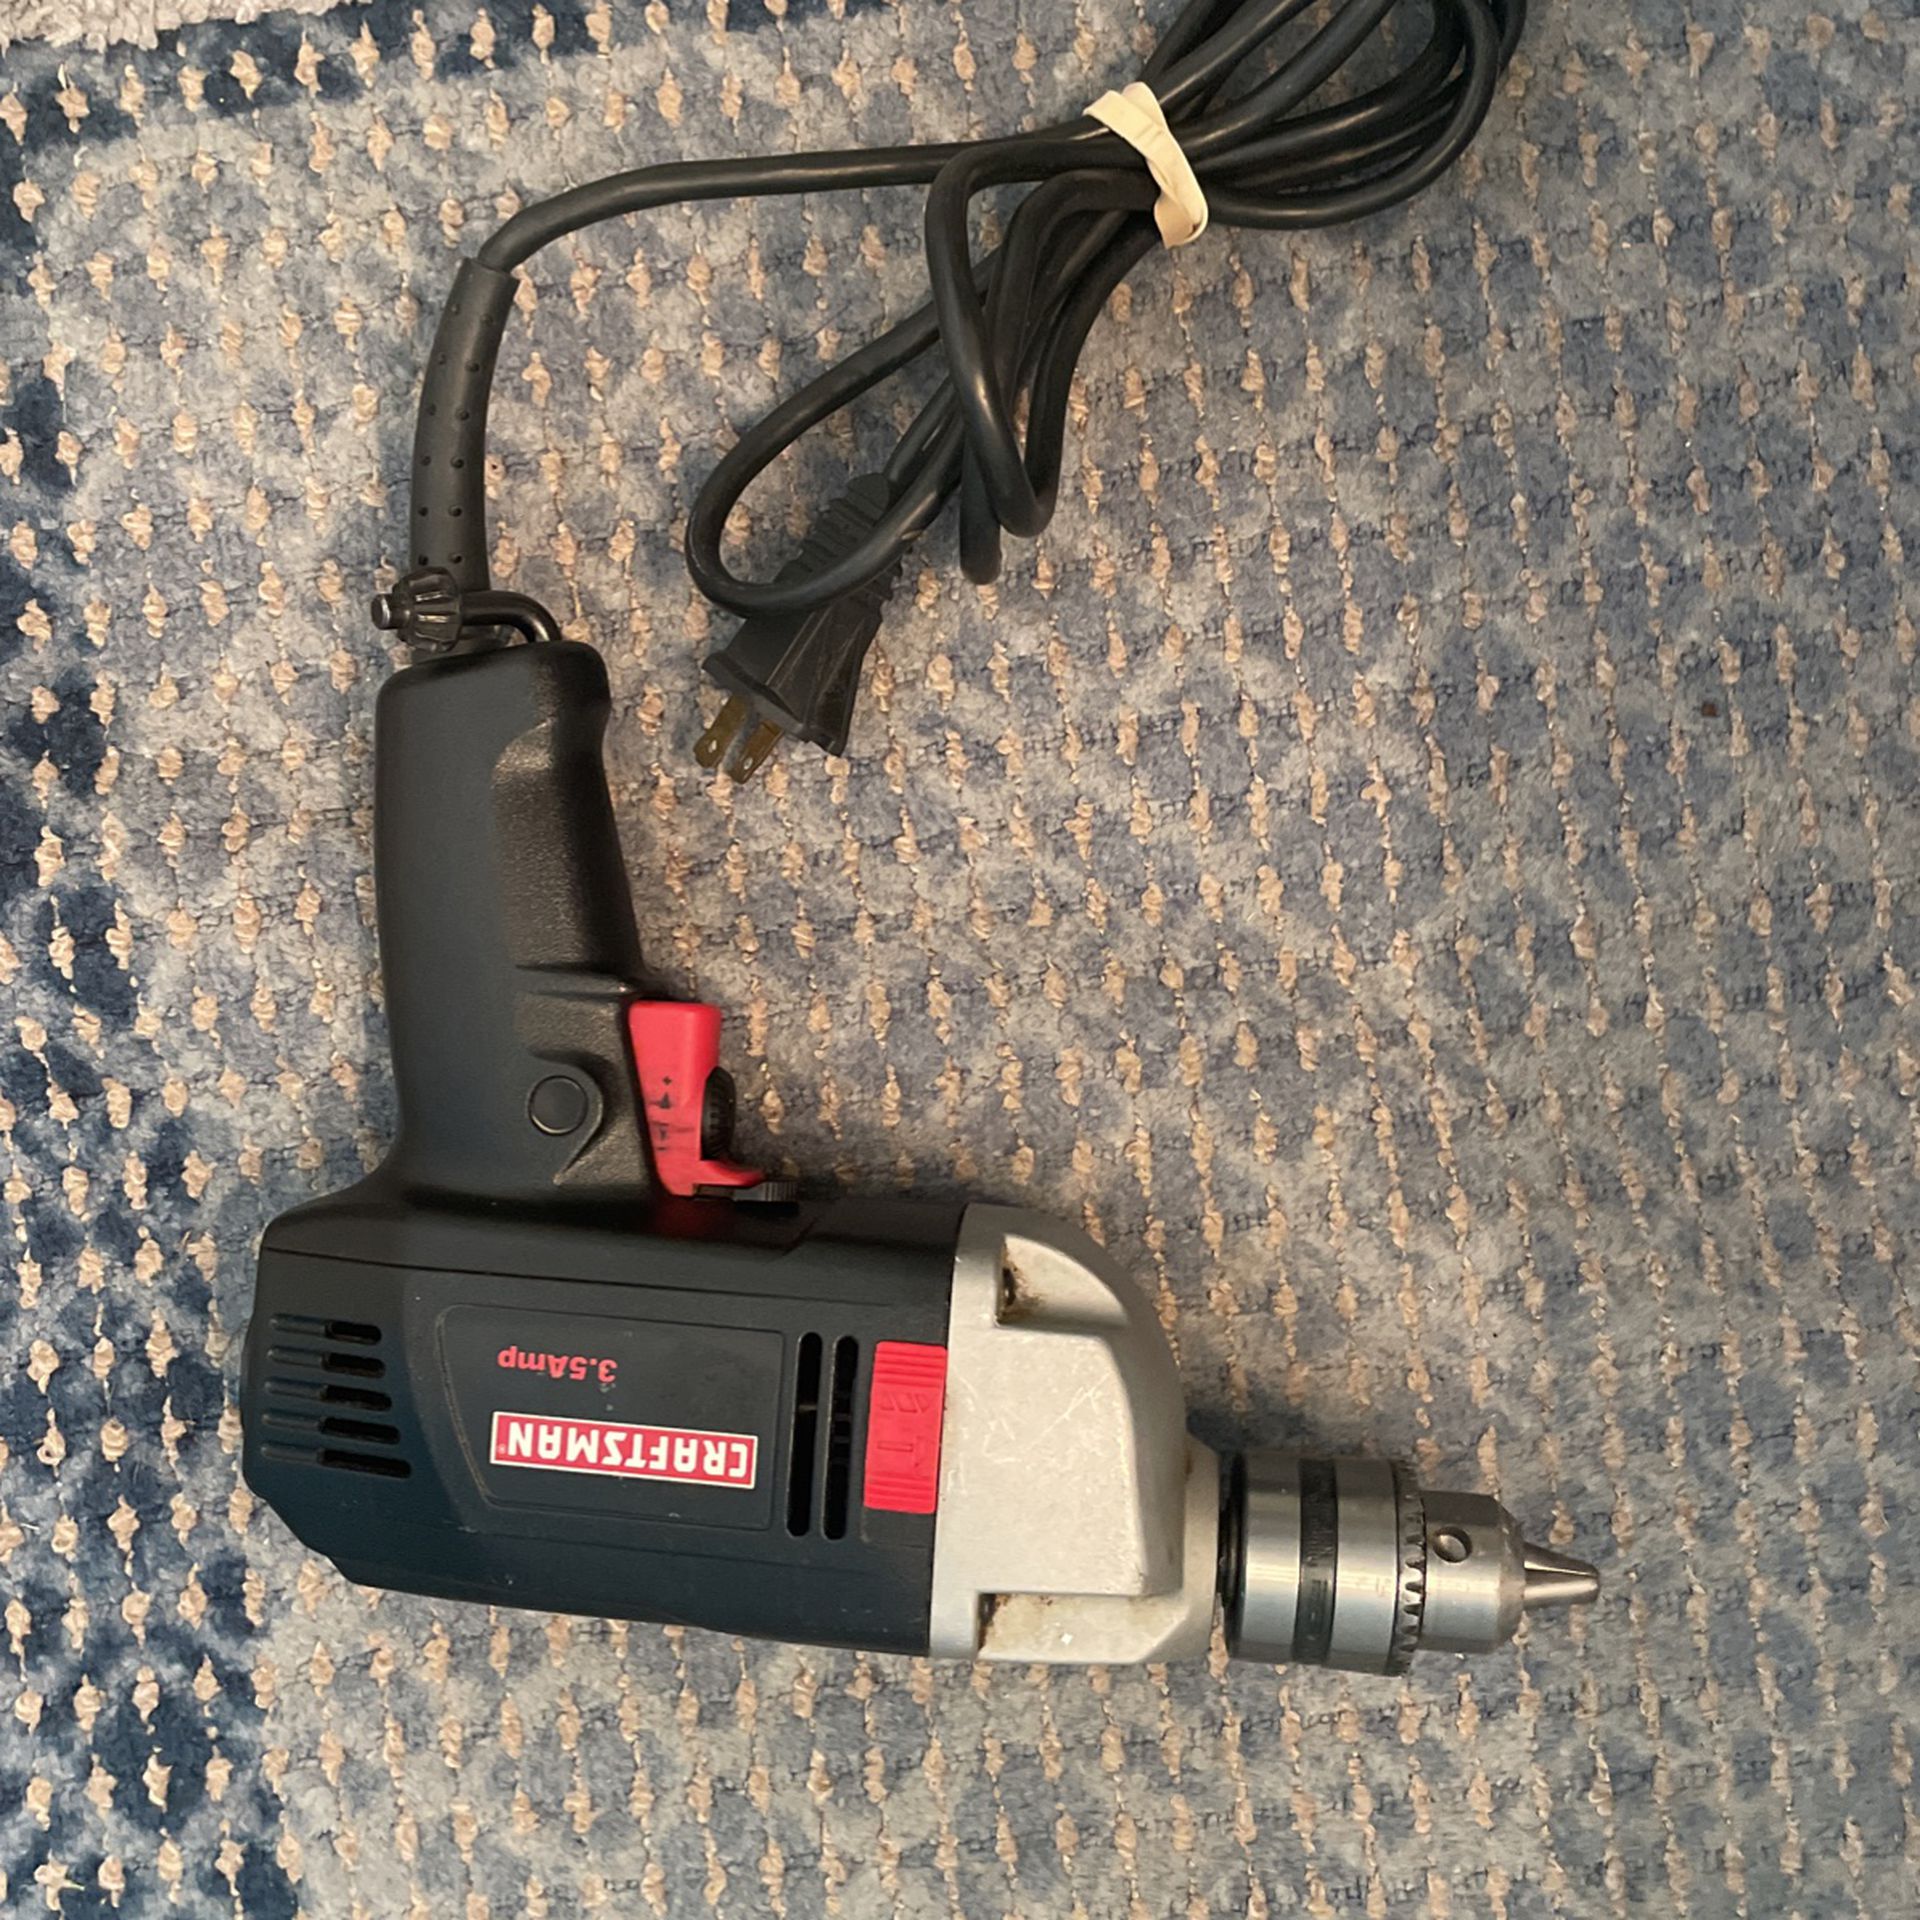 Craftsman 1/2-in Hammer Drill Model(contact info removed)90